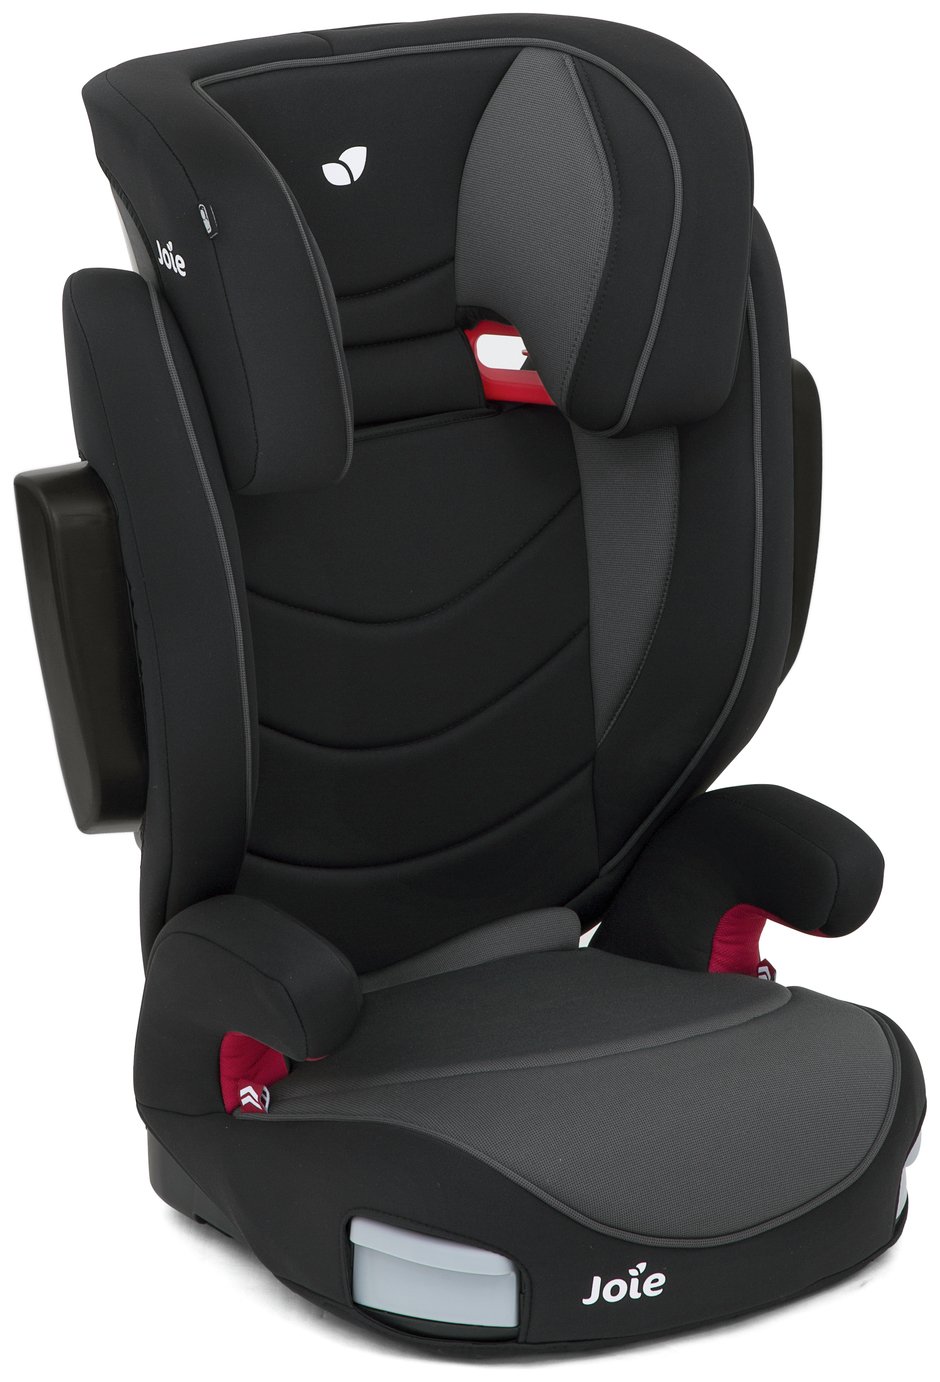 Joie Trillo LX Ember Groups 2/3 Car Seat - Black